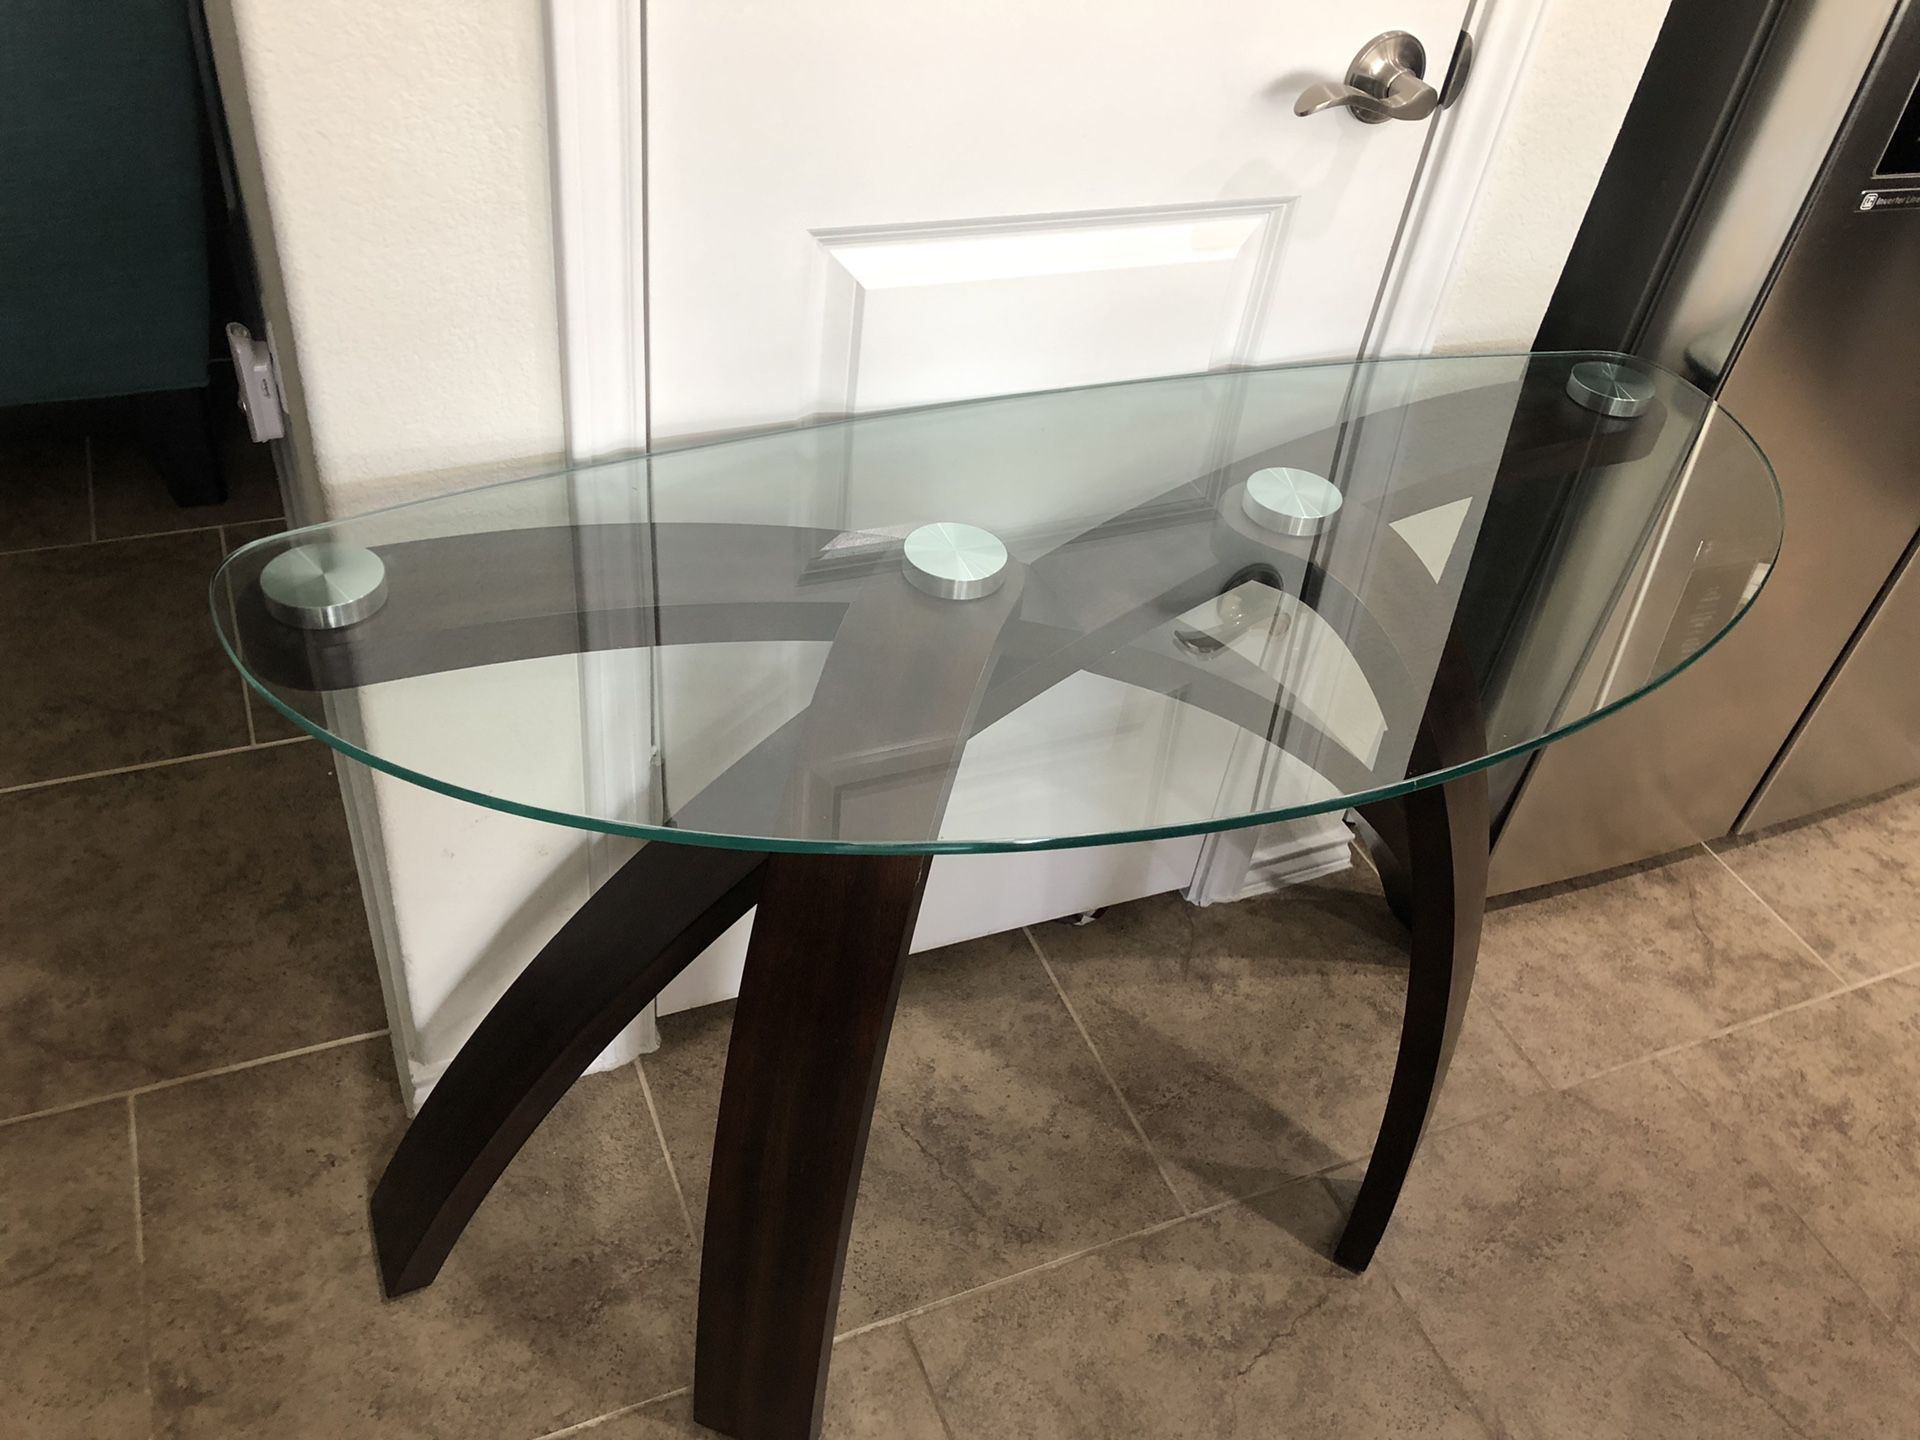 Matching end table and sofa table